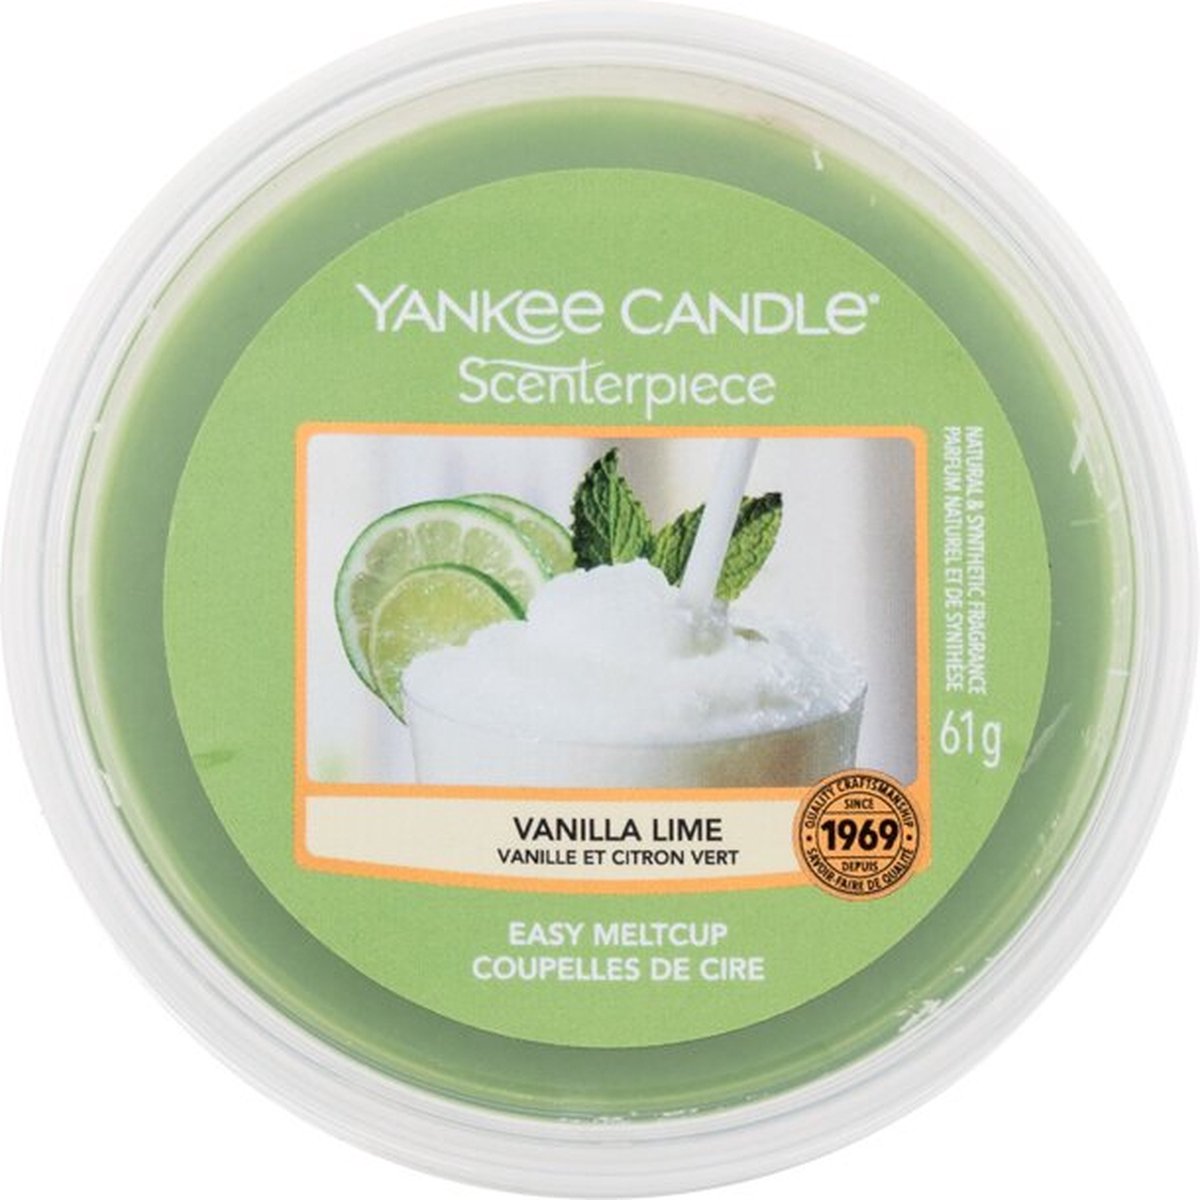 Yankee Candle - Vanilla Lime Scenterpiece Easy MeltCup